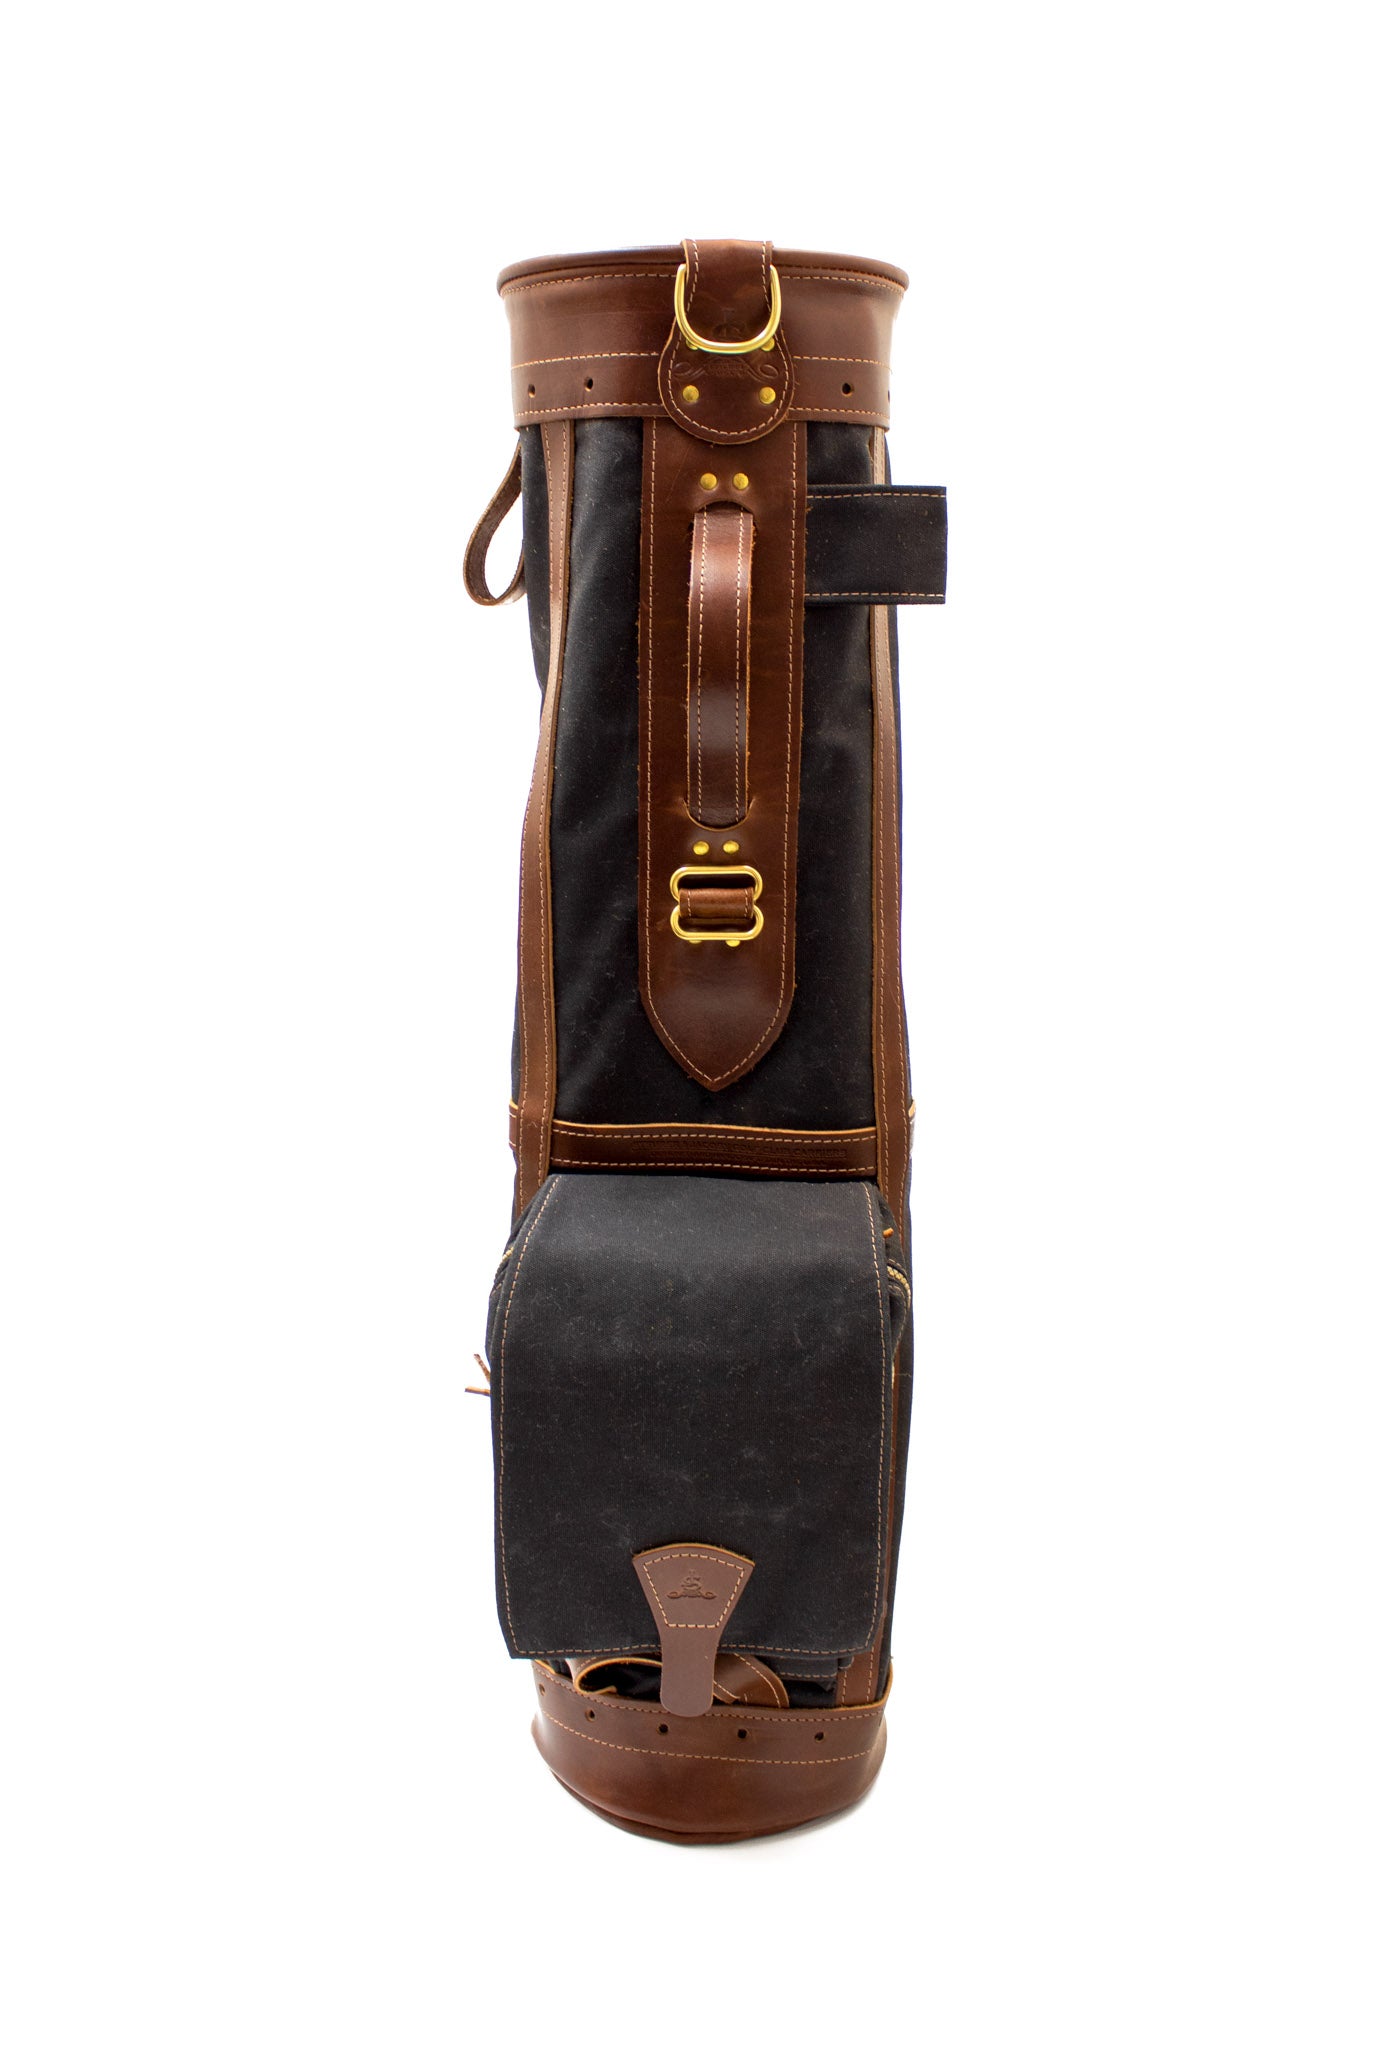 8" Sunday Style Golf Bag Black Waxed Canvas with Chestnut Leather- Steurer & Jacoby